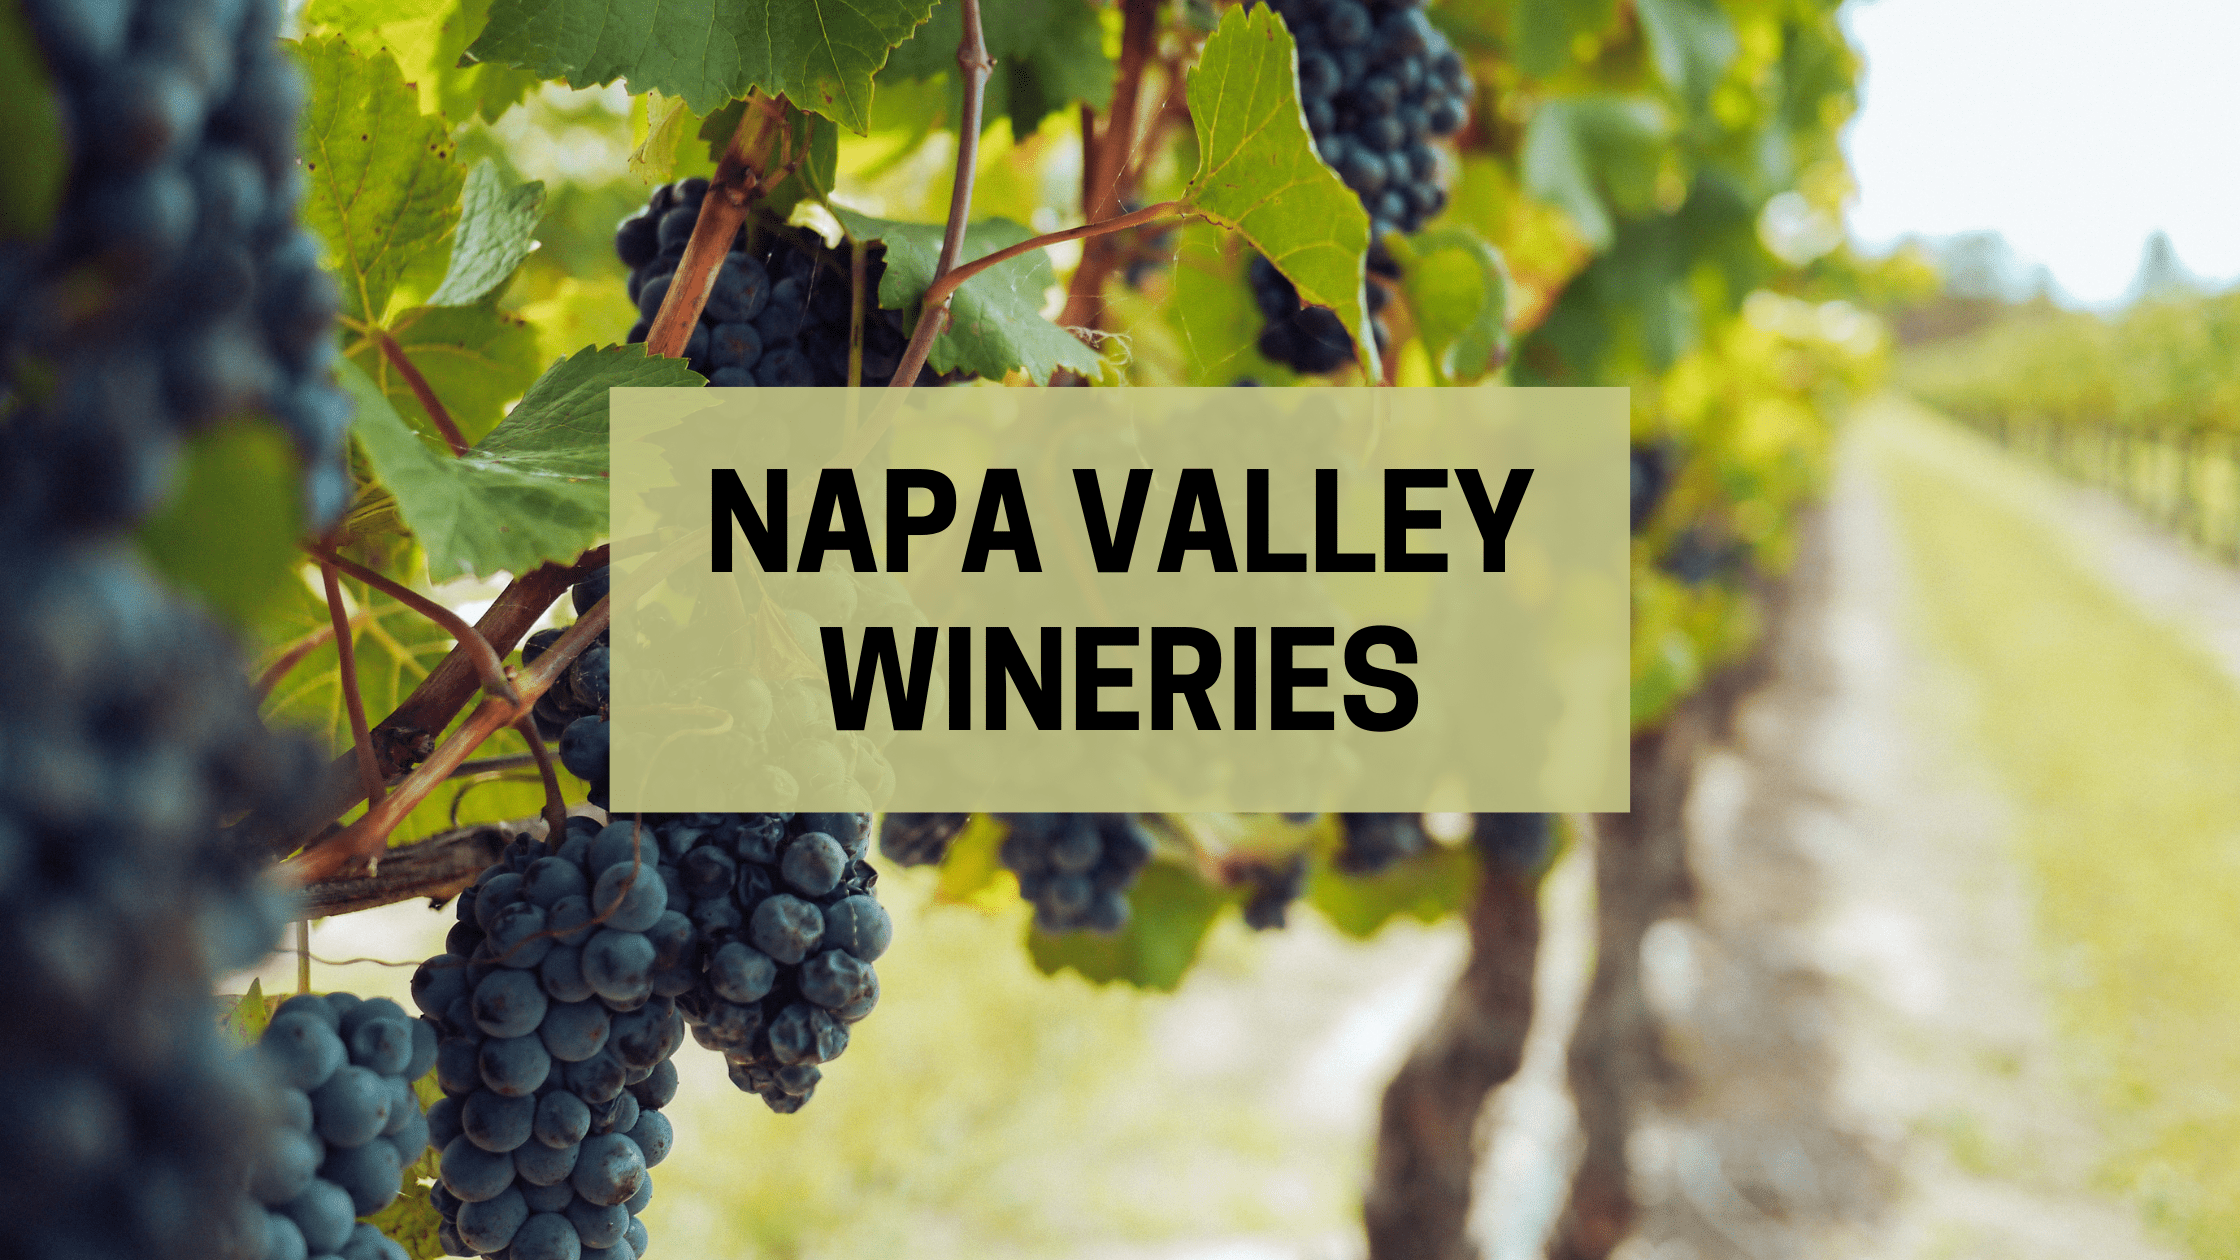 napa valley wineries review